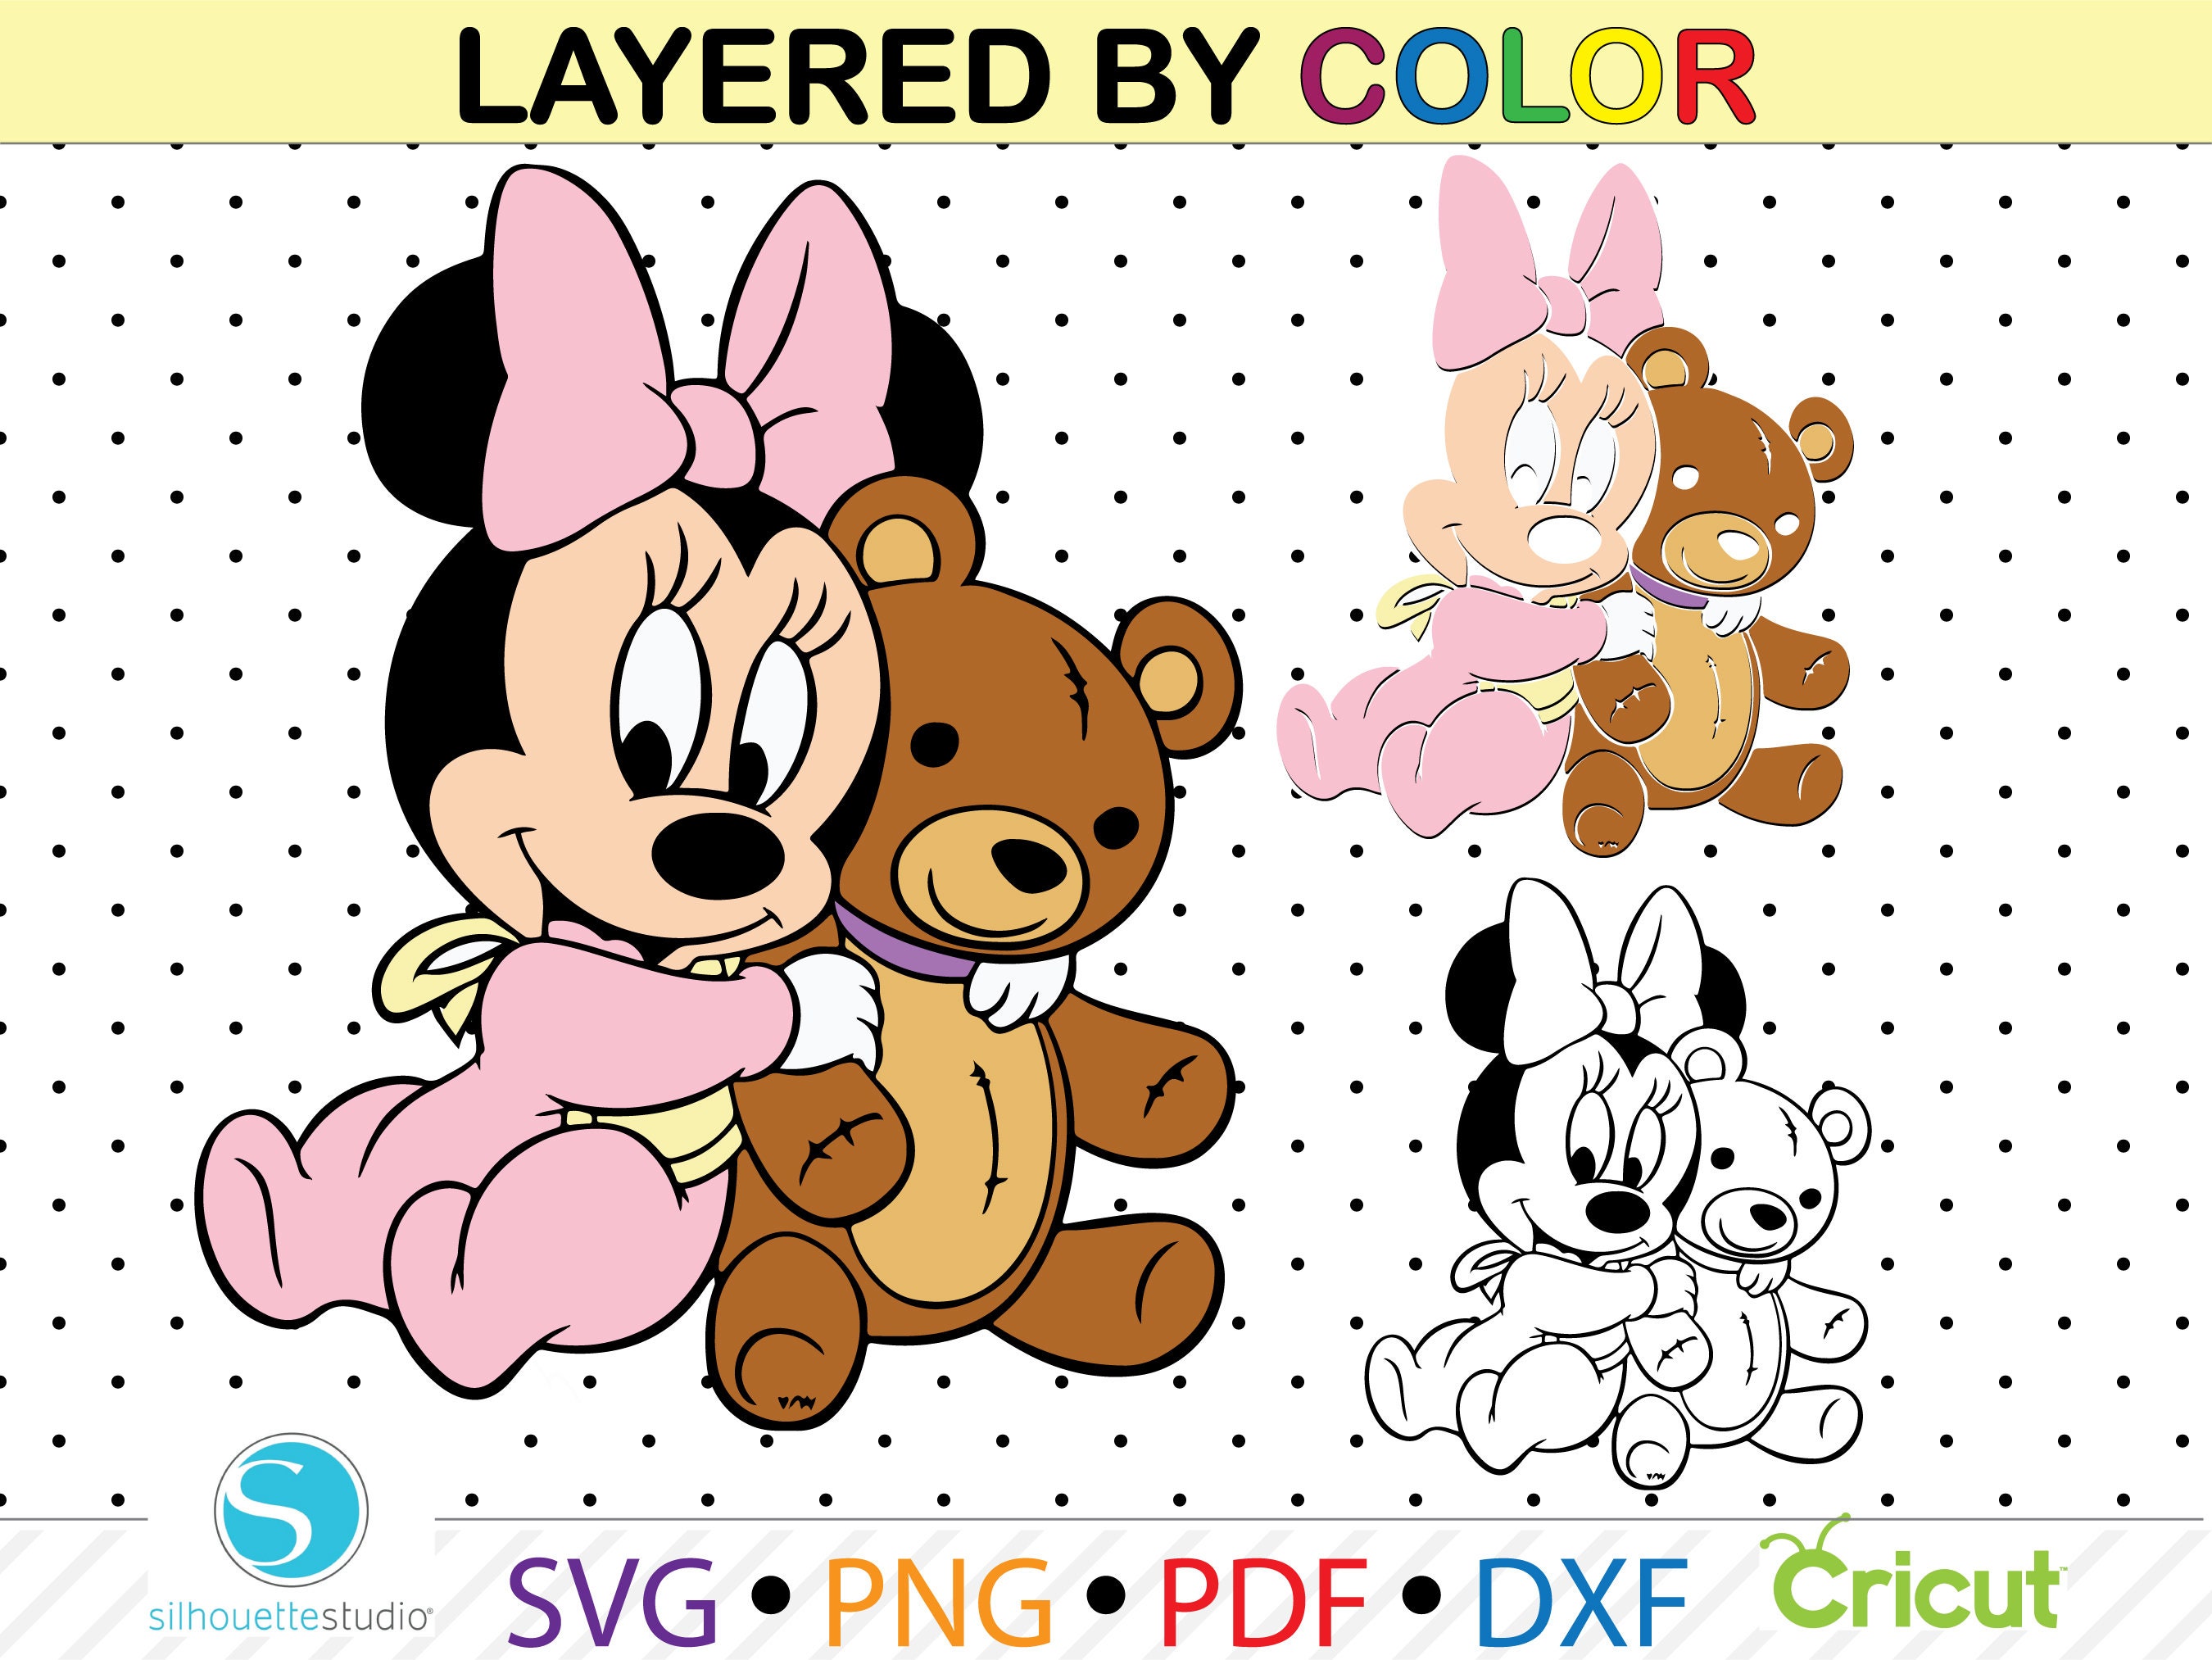 Baby Mickey Mouse PNG Digital Product Color Illustrationsbaby